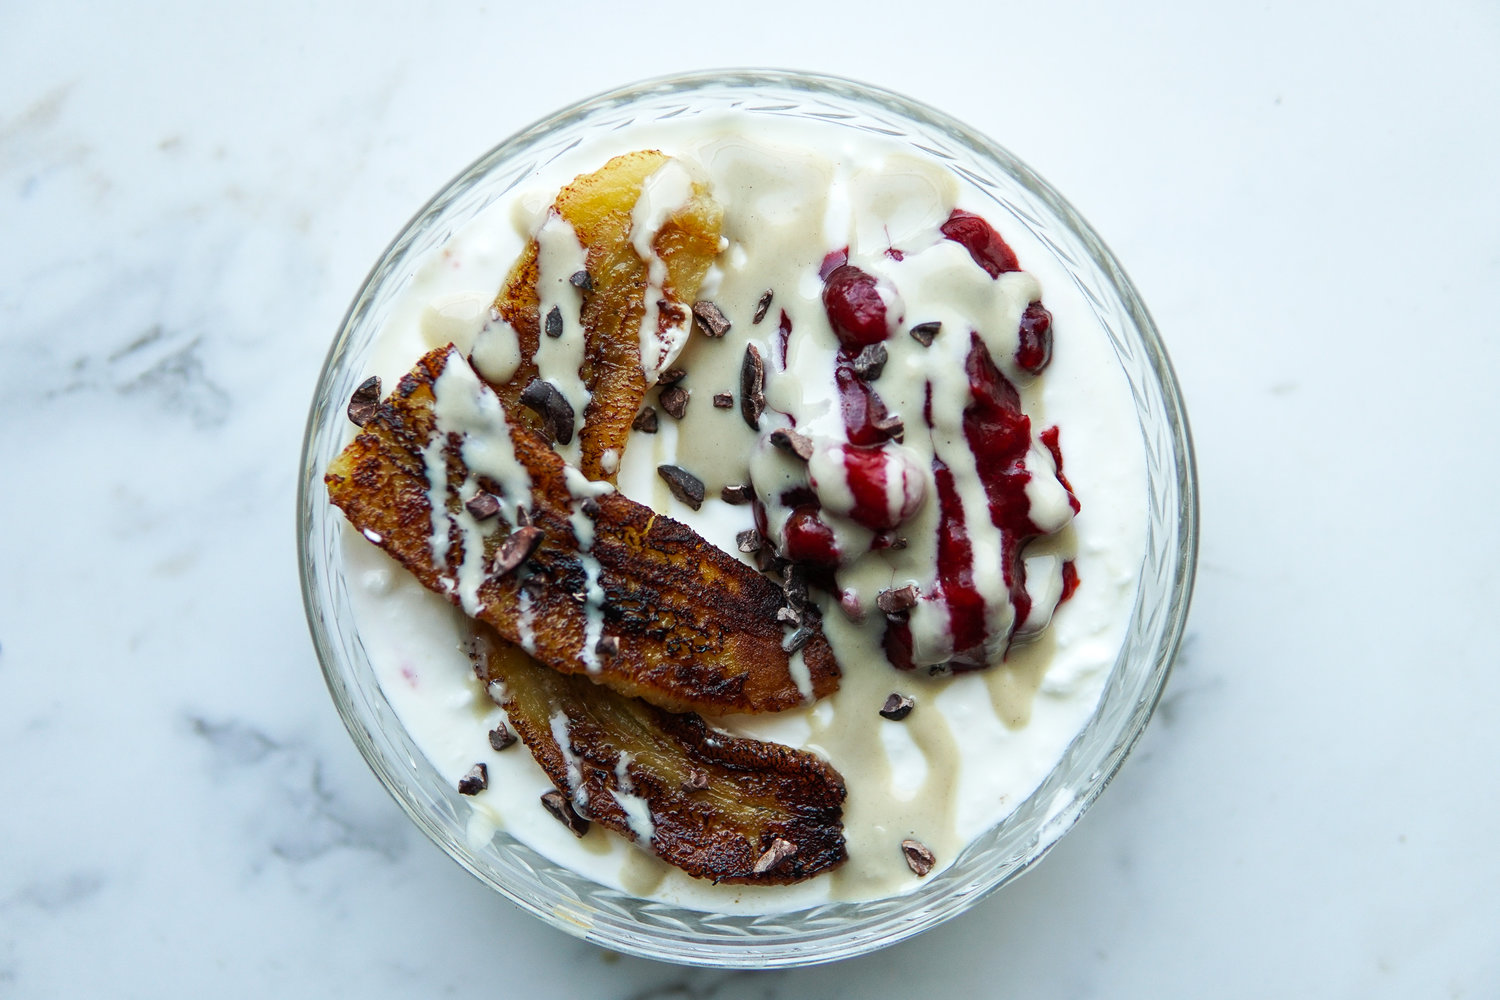 Yogurt bowl with caramelized bananas, cranberry sauce, cacao nibs and tahini drizzle